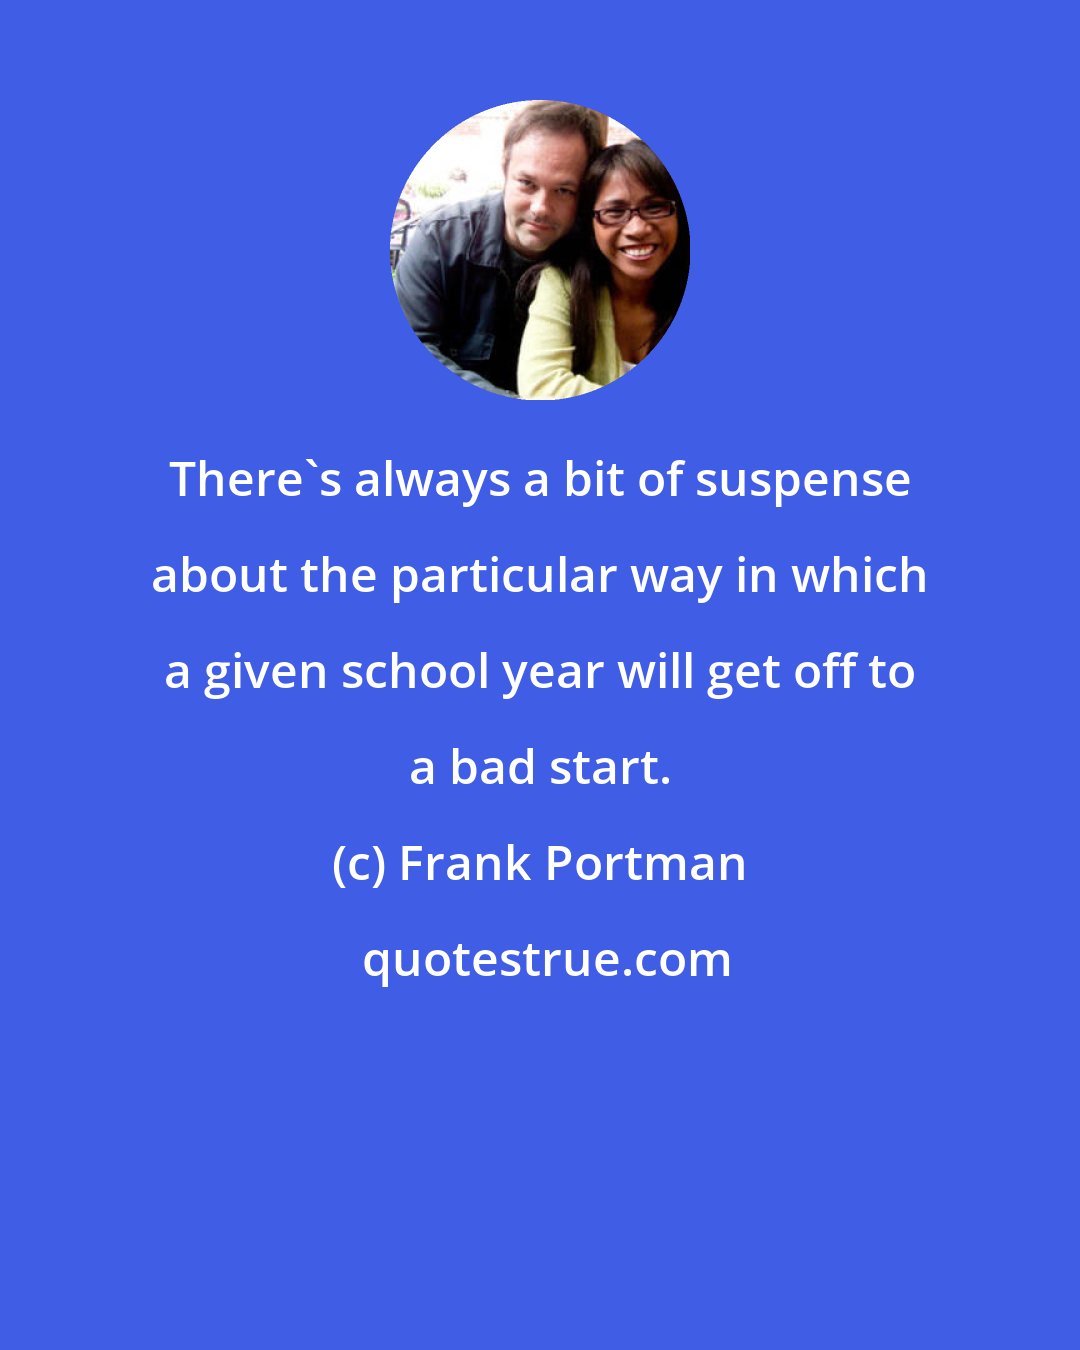 Frank Portman: There's always a bit of suspense about the particular way in which a given school year will get off to a bad start.